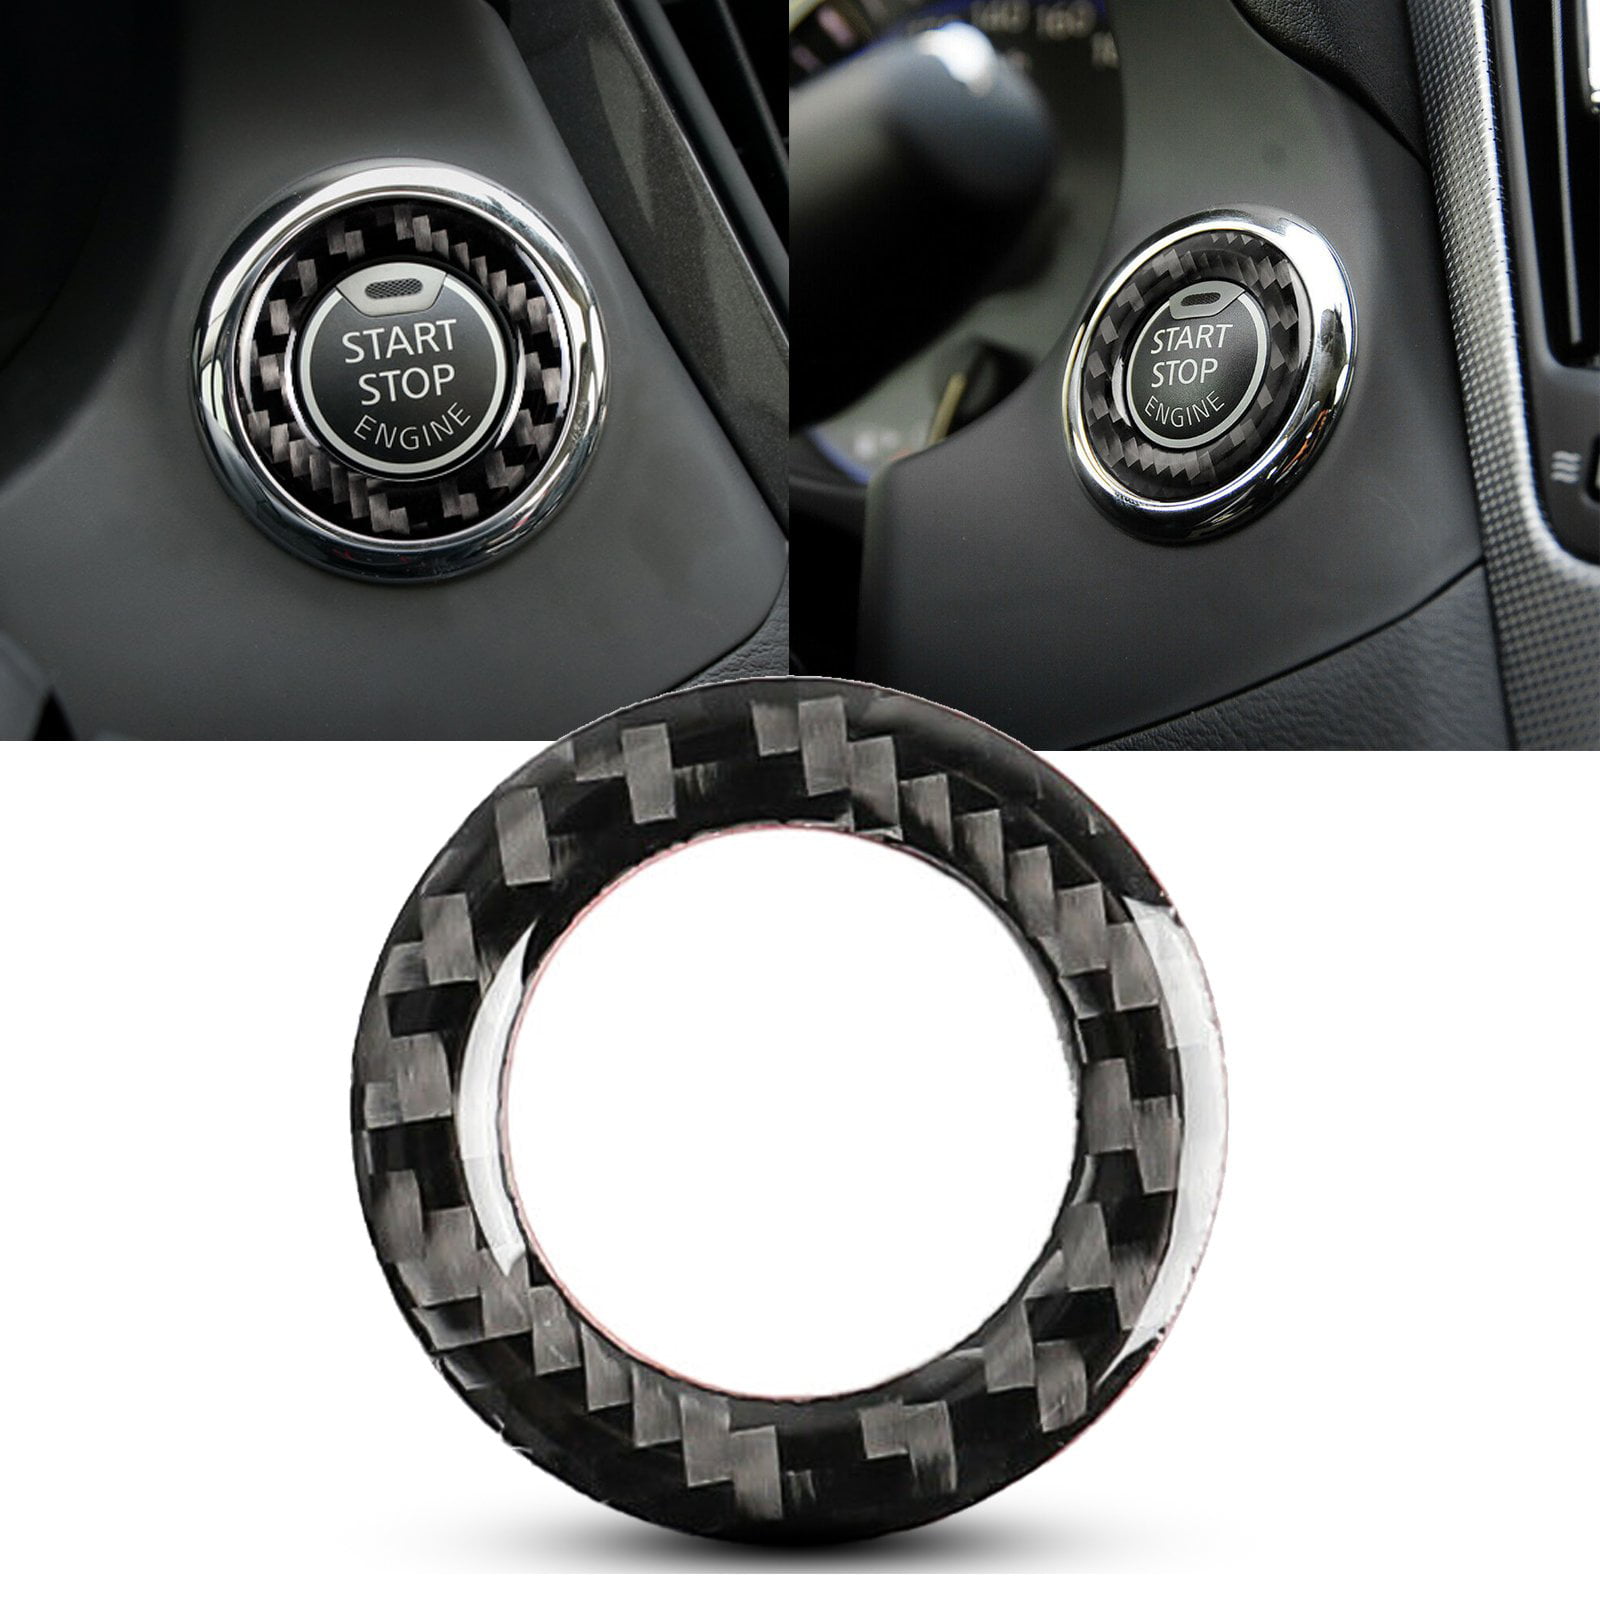 Steering Wheel Logo Sign 3D Decals Cover Trim Carbon Fiber Car Steering Wheel Sticker Cover Decor Fit for Infiniti Q50 Q60 2013 2014 2016 201 